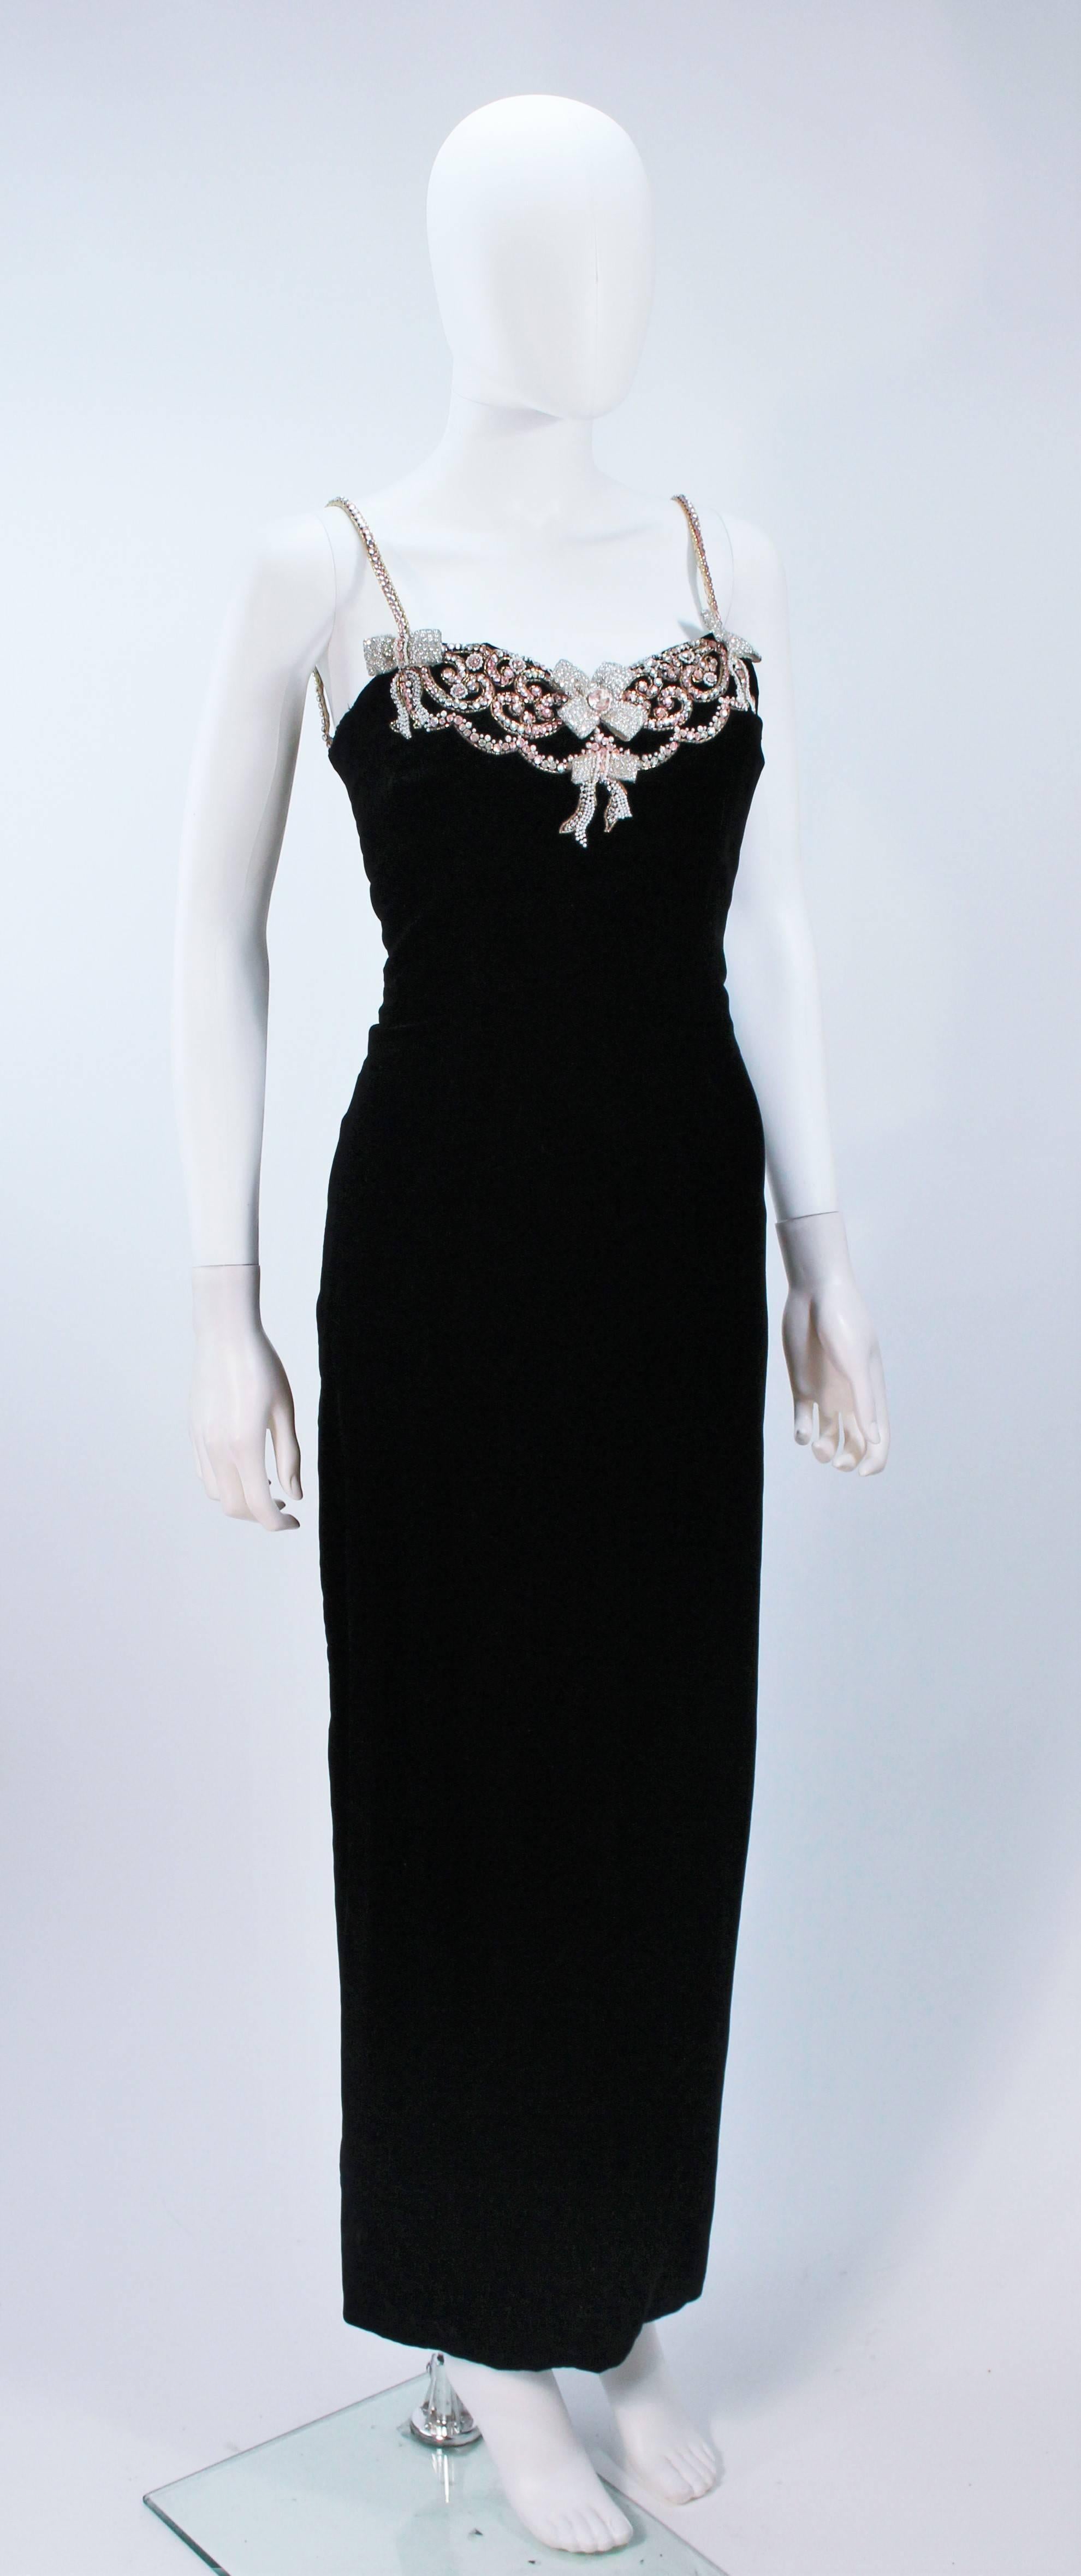 CAROLYN ROEHM Black Velvet Gown with Bows & Embellished Neckline Size 6-8 2